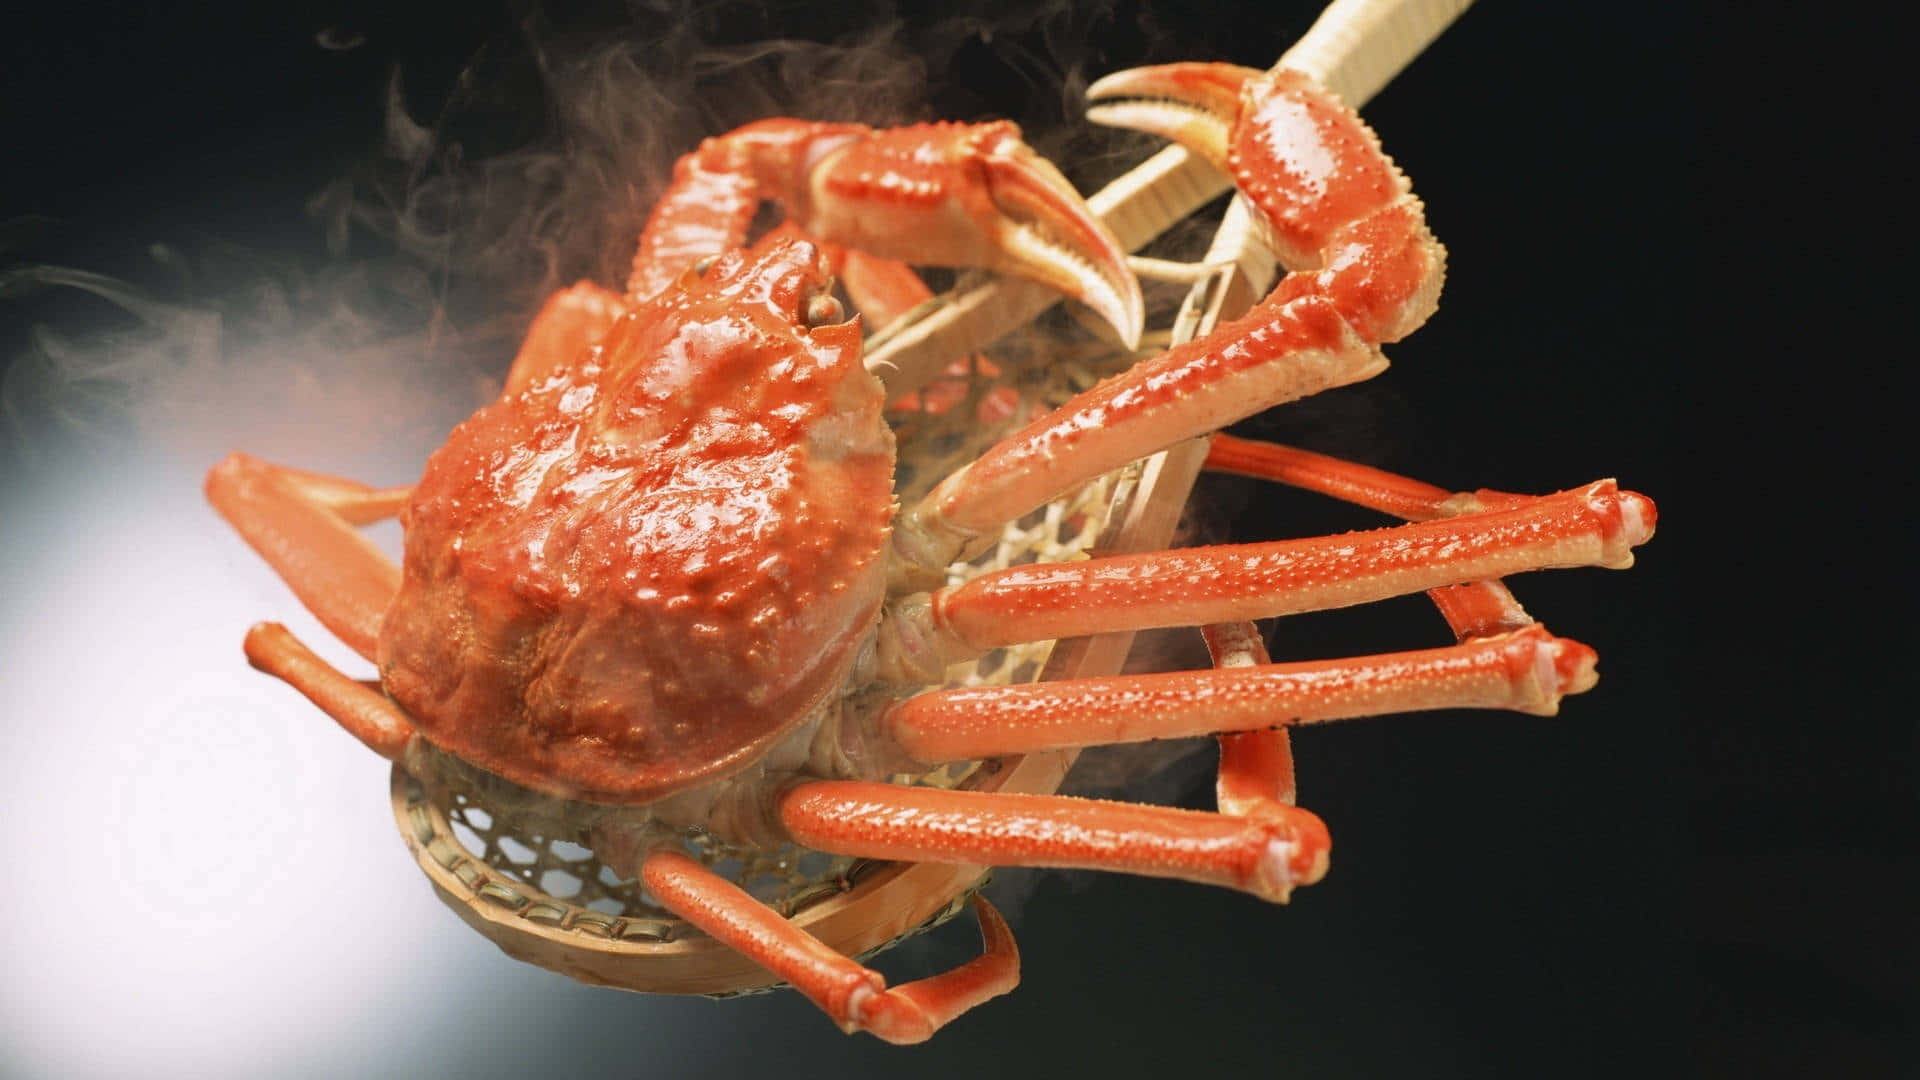 Steamed Red Crab Smoke Wallpaper